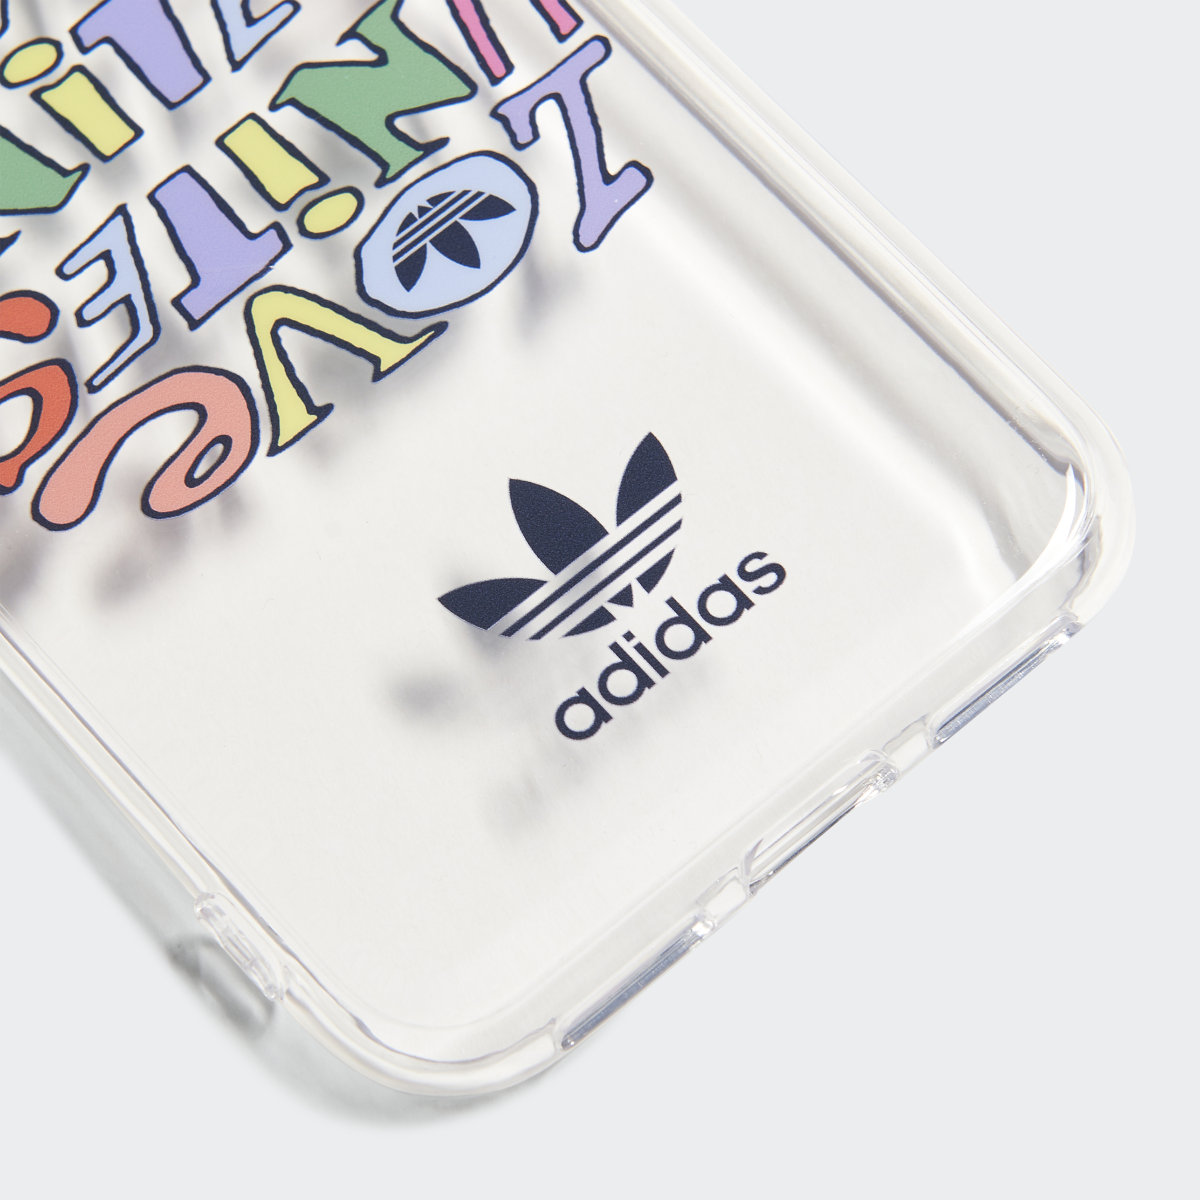 Adidas Pride Allover Print iPhone X/Xs Snap Case. 4